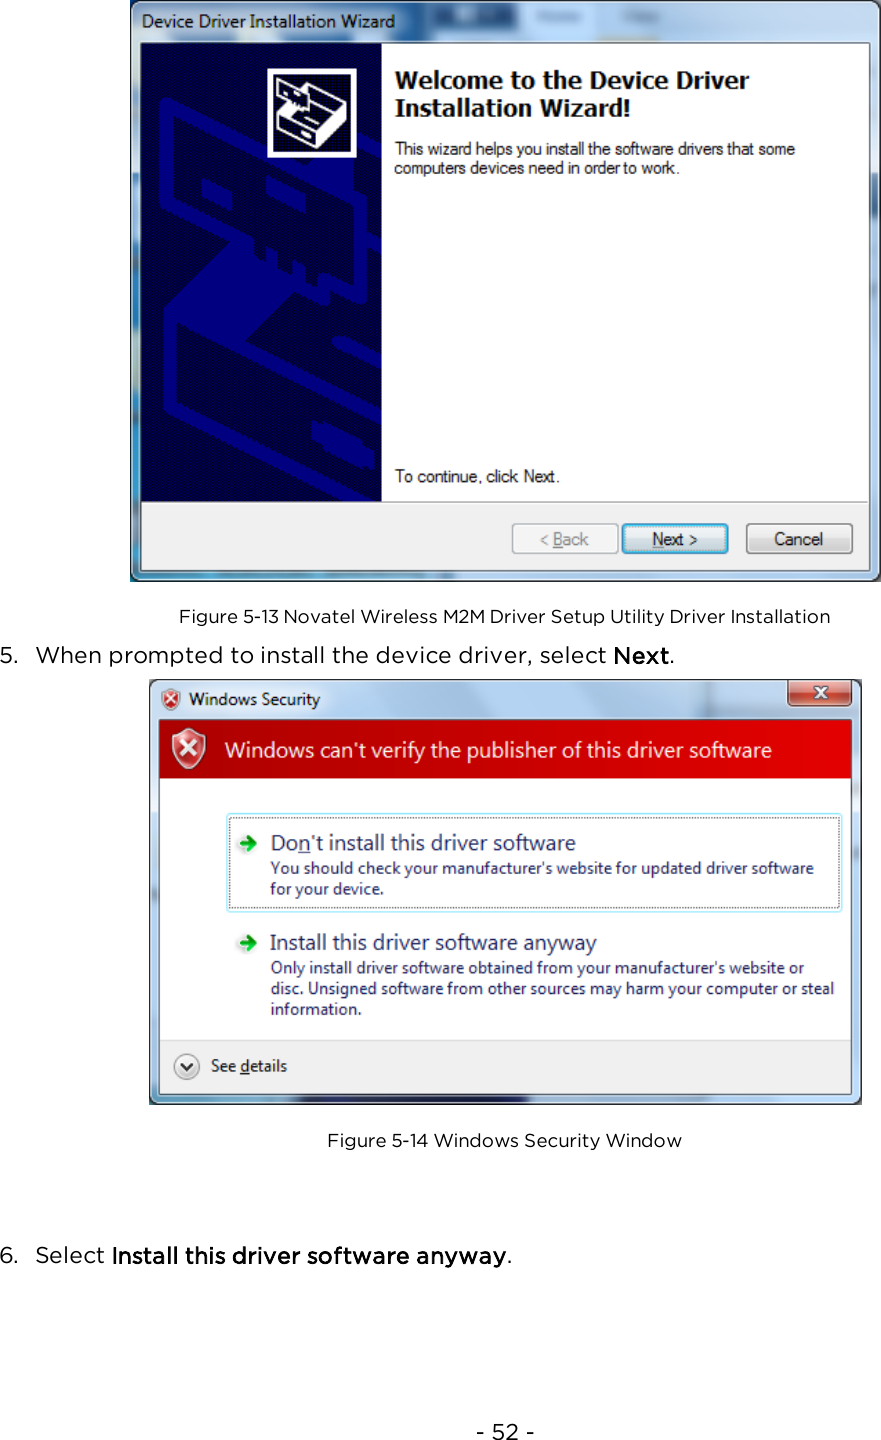 - 52 -Figure 5-13 Novatel Wireless M2M Driver Setup Utility Driver Installation5. When prompted to install the device driver, select Next.Figure 5-14 Windows Security Window6. Select Install this driver software anyway.